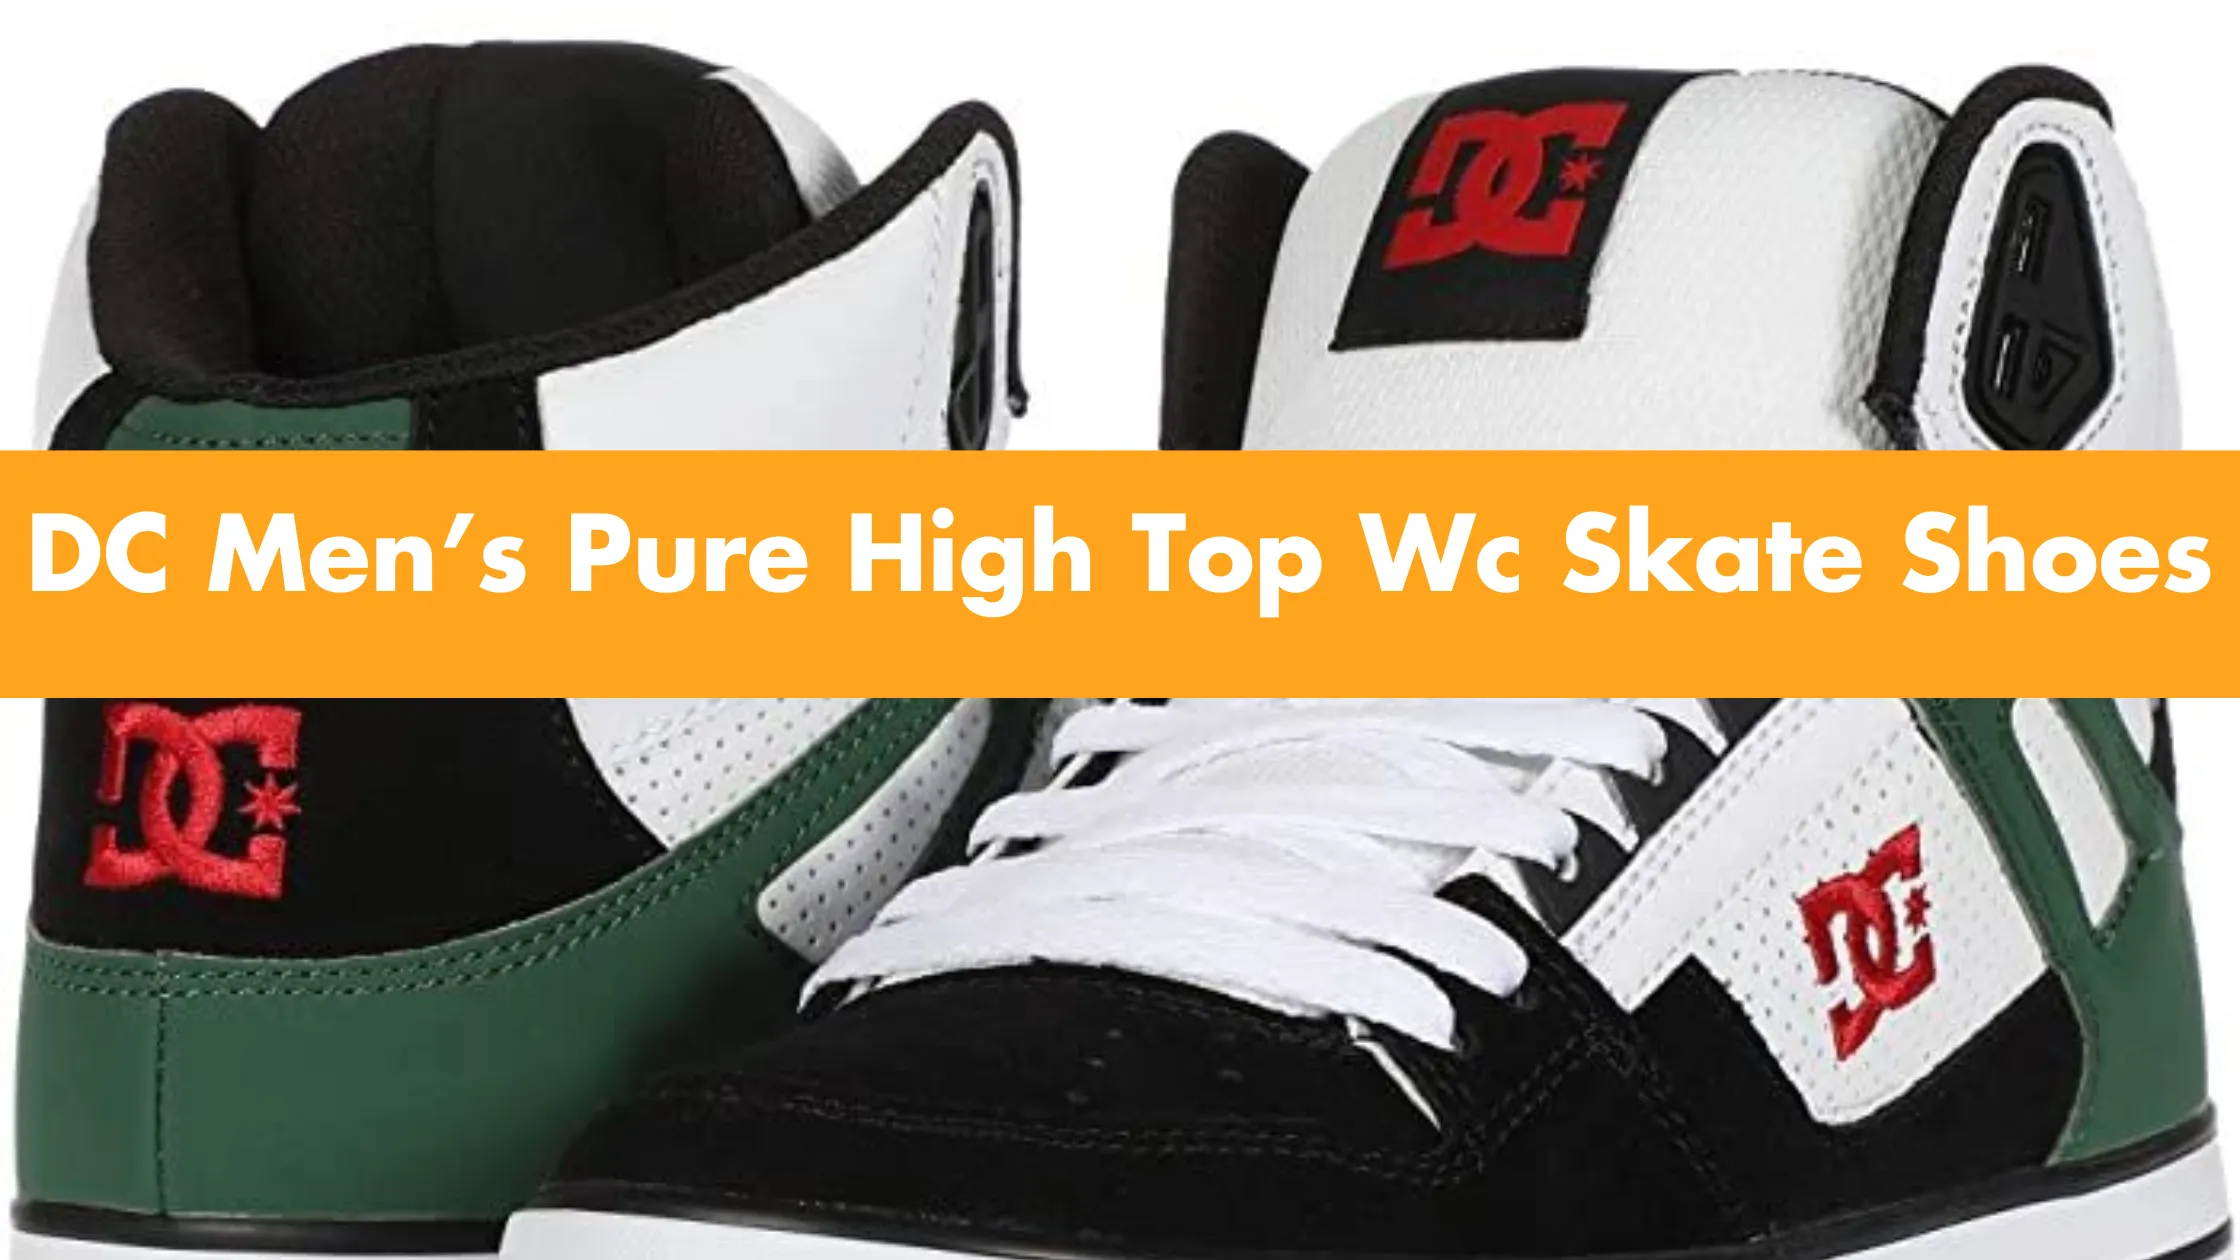 Dc Men’s Pure High Top Wc Skate Shoes Review